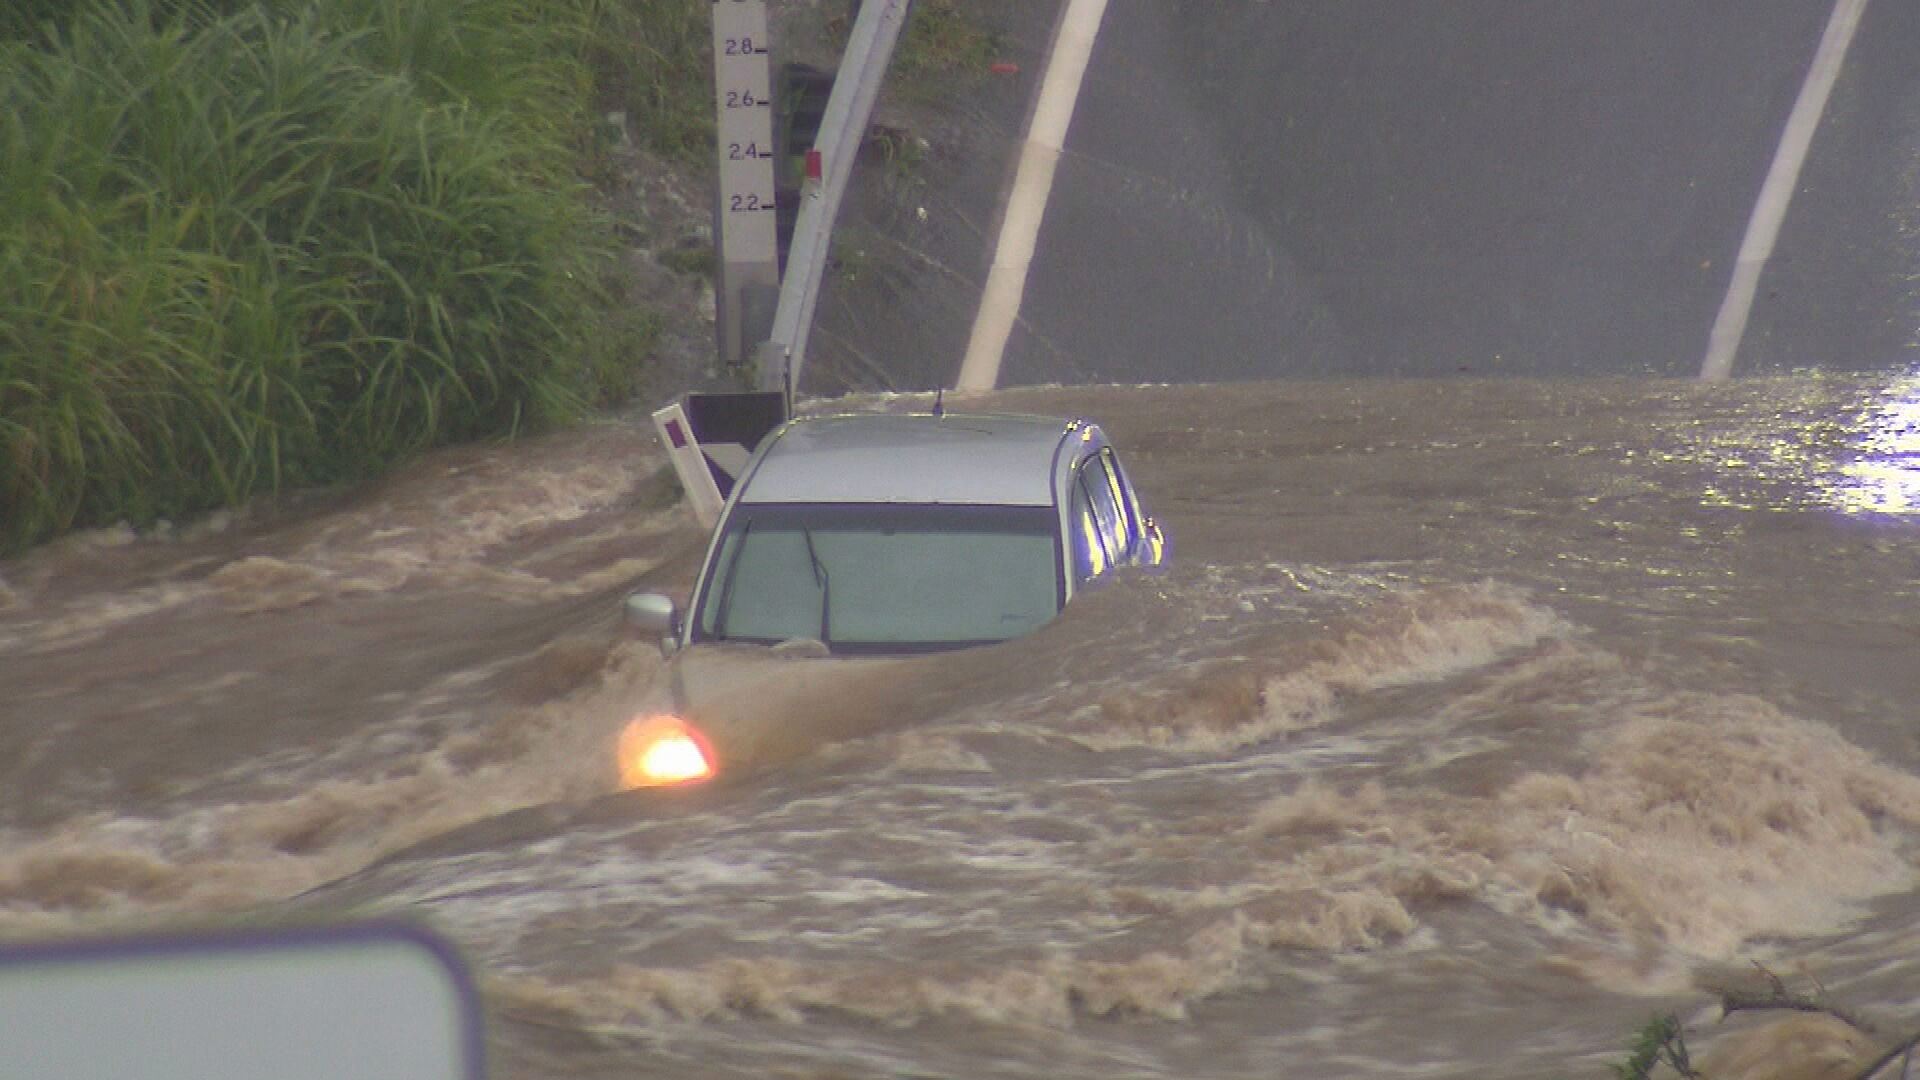 A car is overwhelmed by water while trying to cross a submerged road.